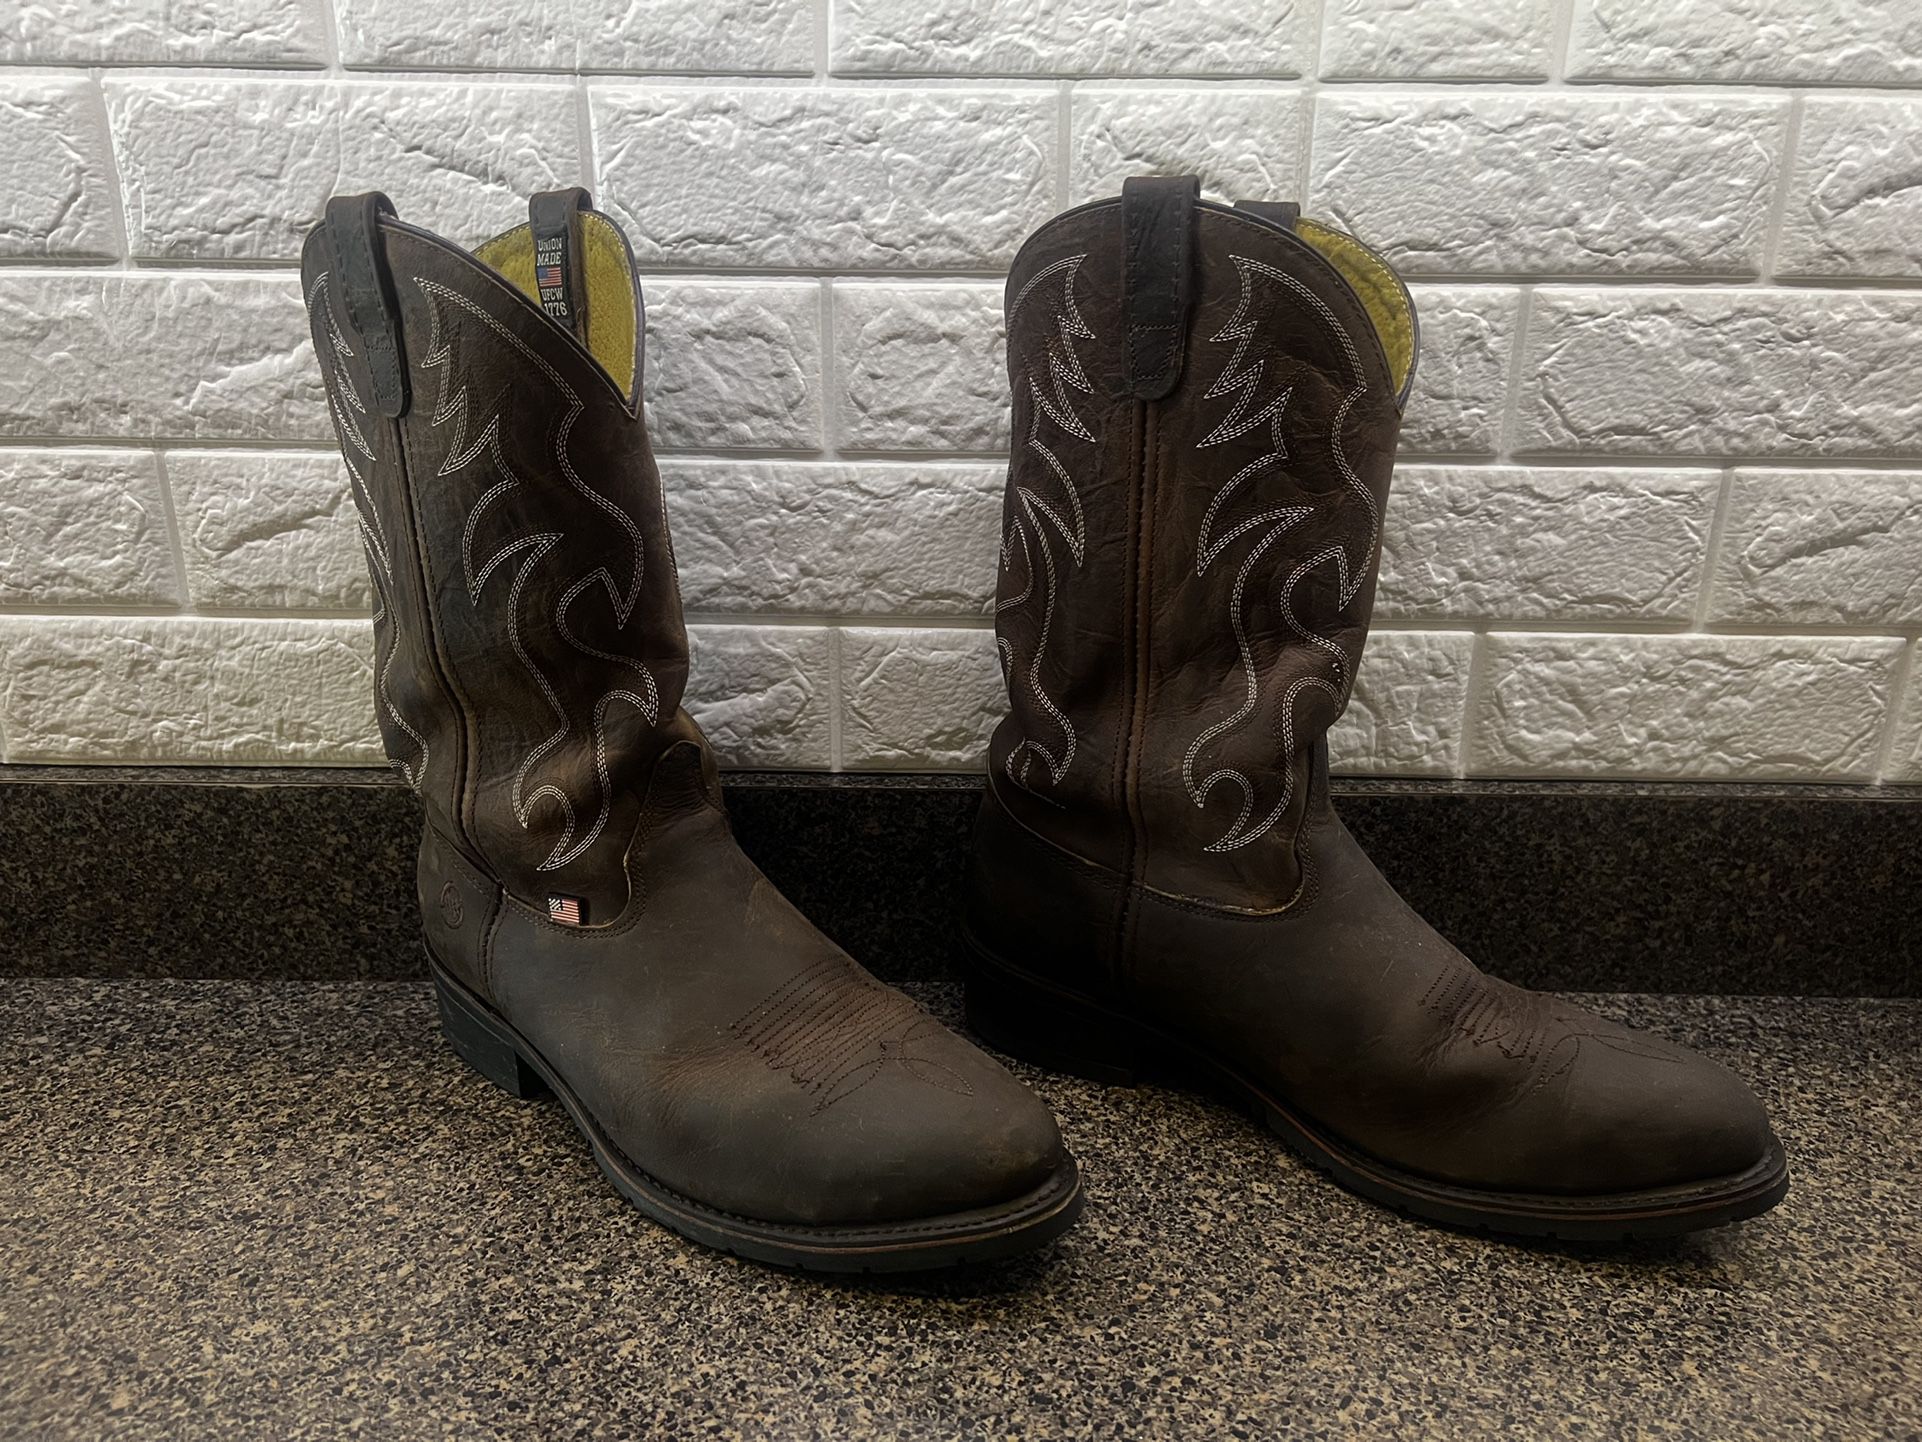 Double H Steel Toe Work Boots 11.5